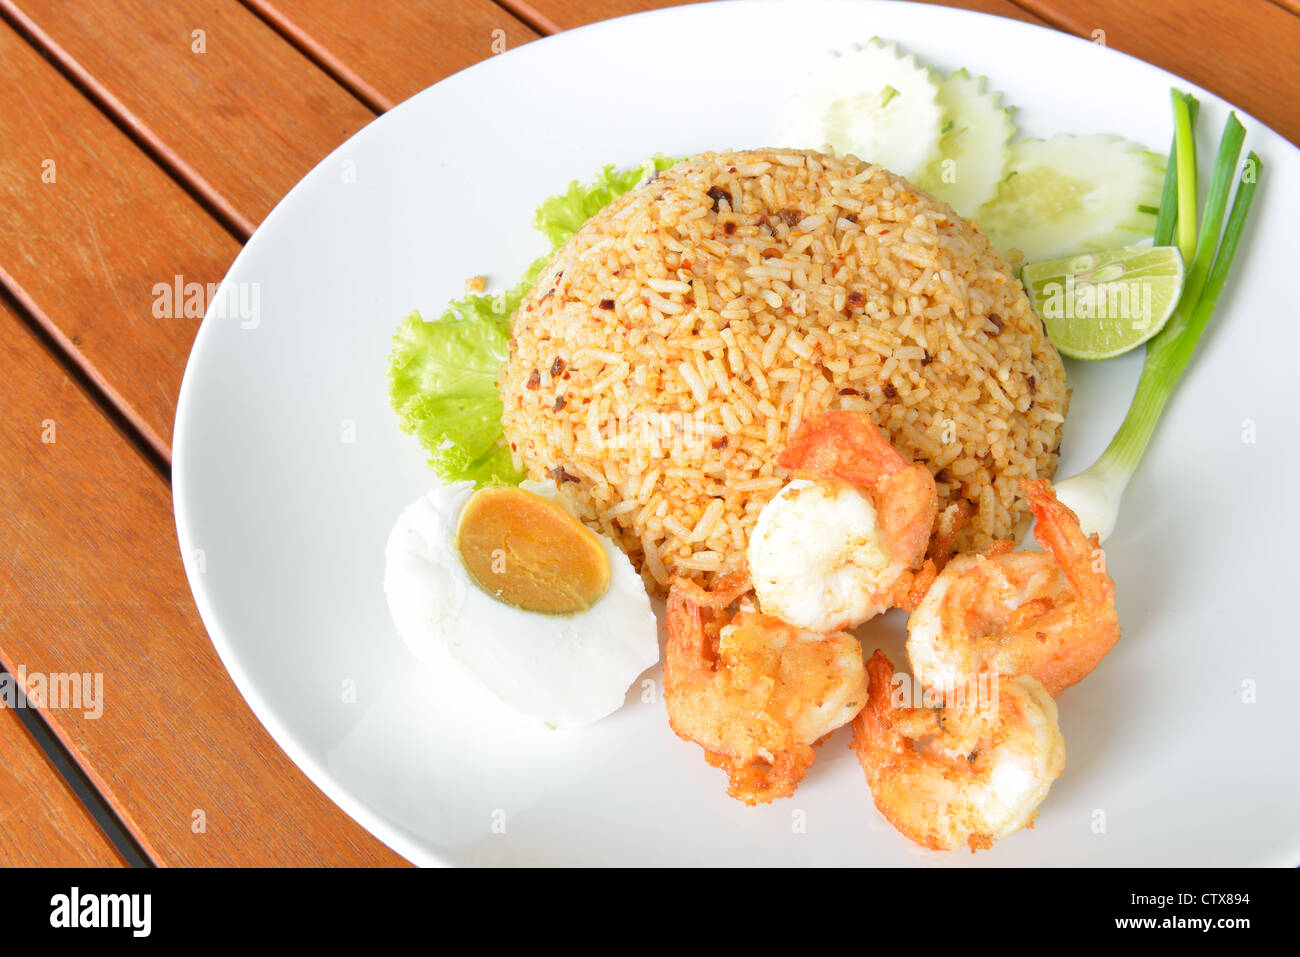 Thai food style call 'Fried rice with chili paste' served with fried shrimp and salted egg. Stock Photo